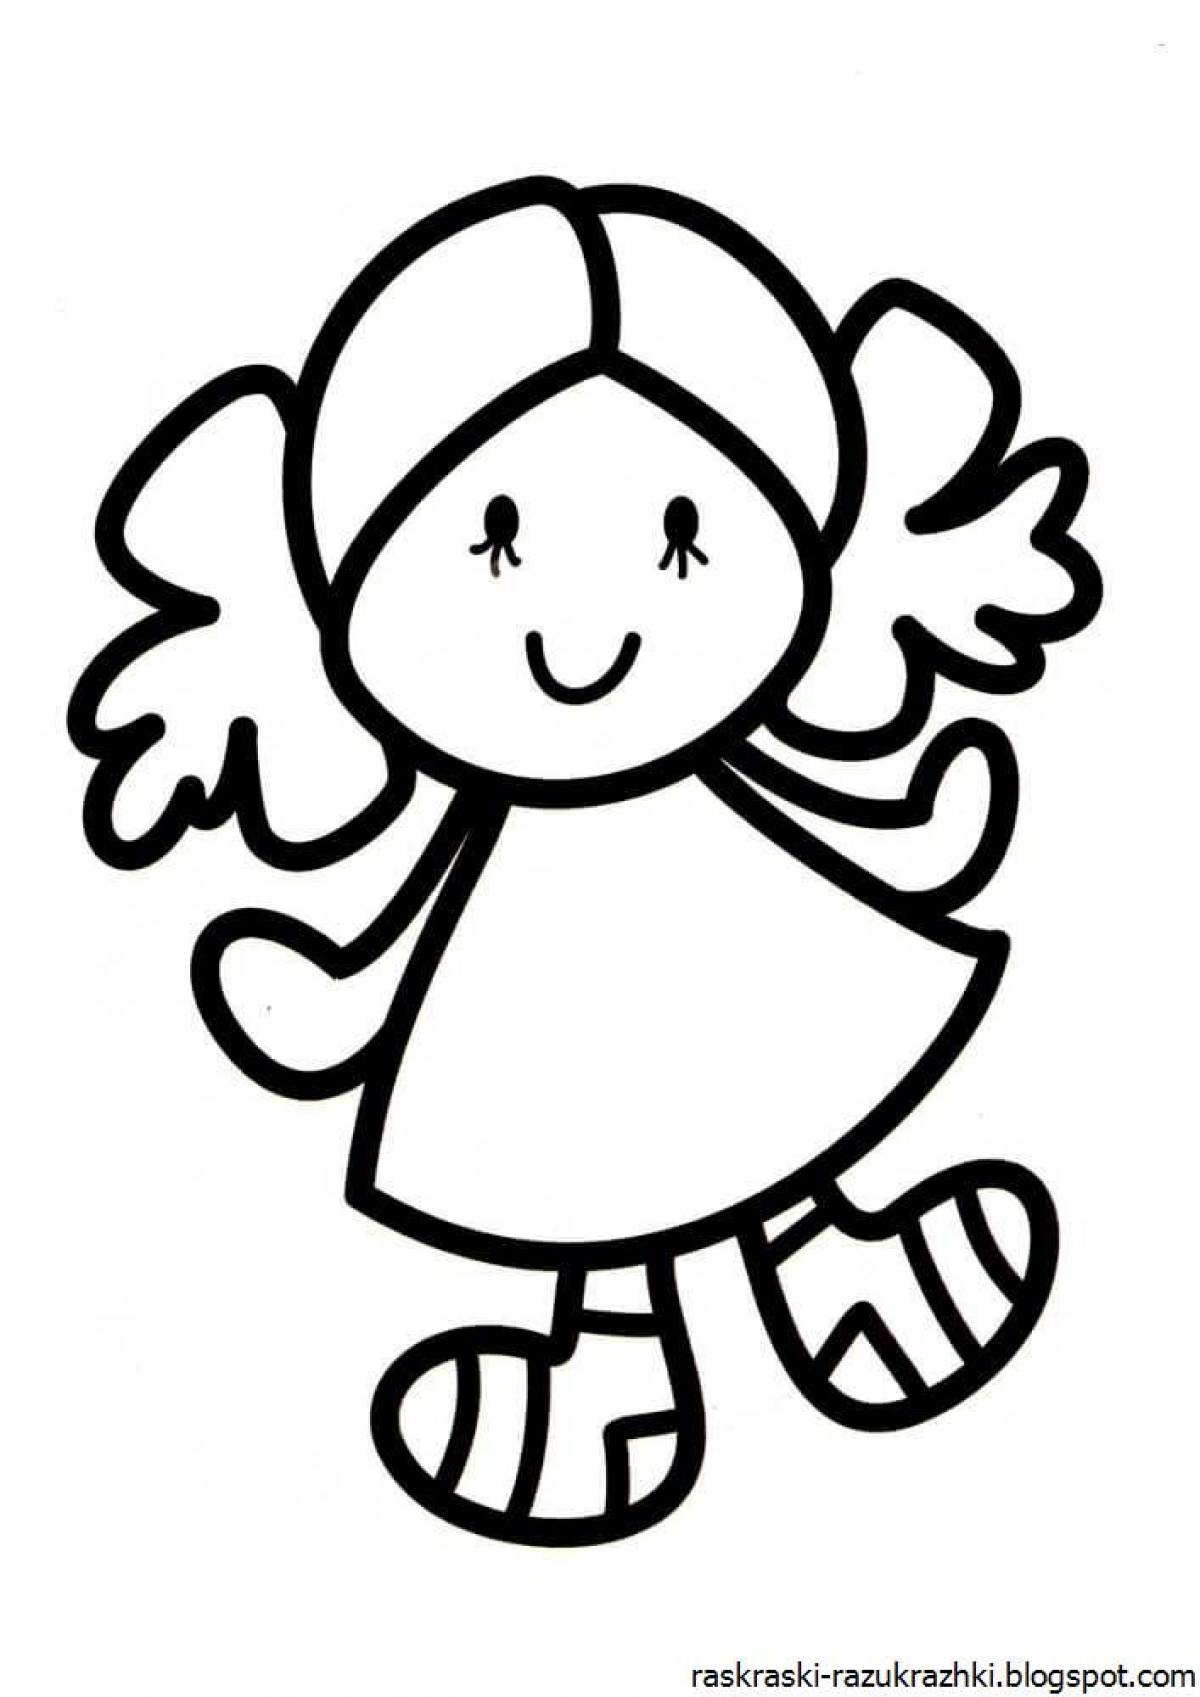 Coloring pages for girls from 3 years old